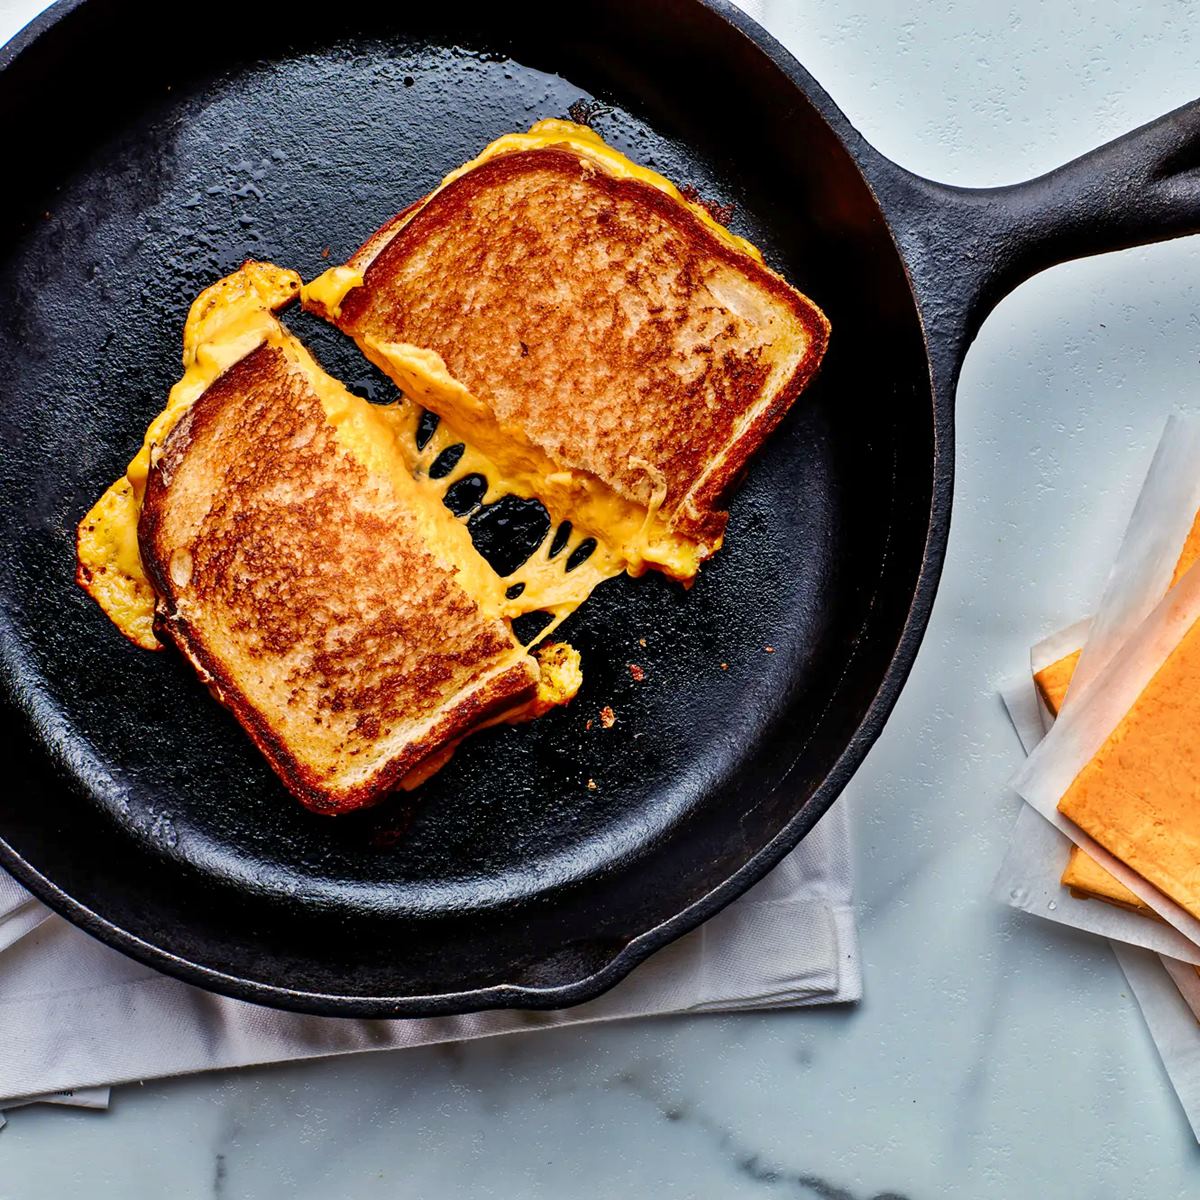 the-burger-lab-how-to-make-any-cheese-melt-like-american-almost